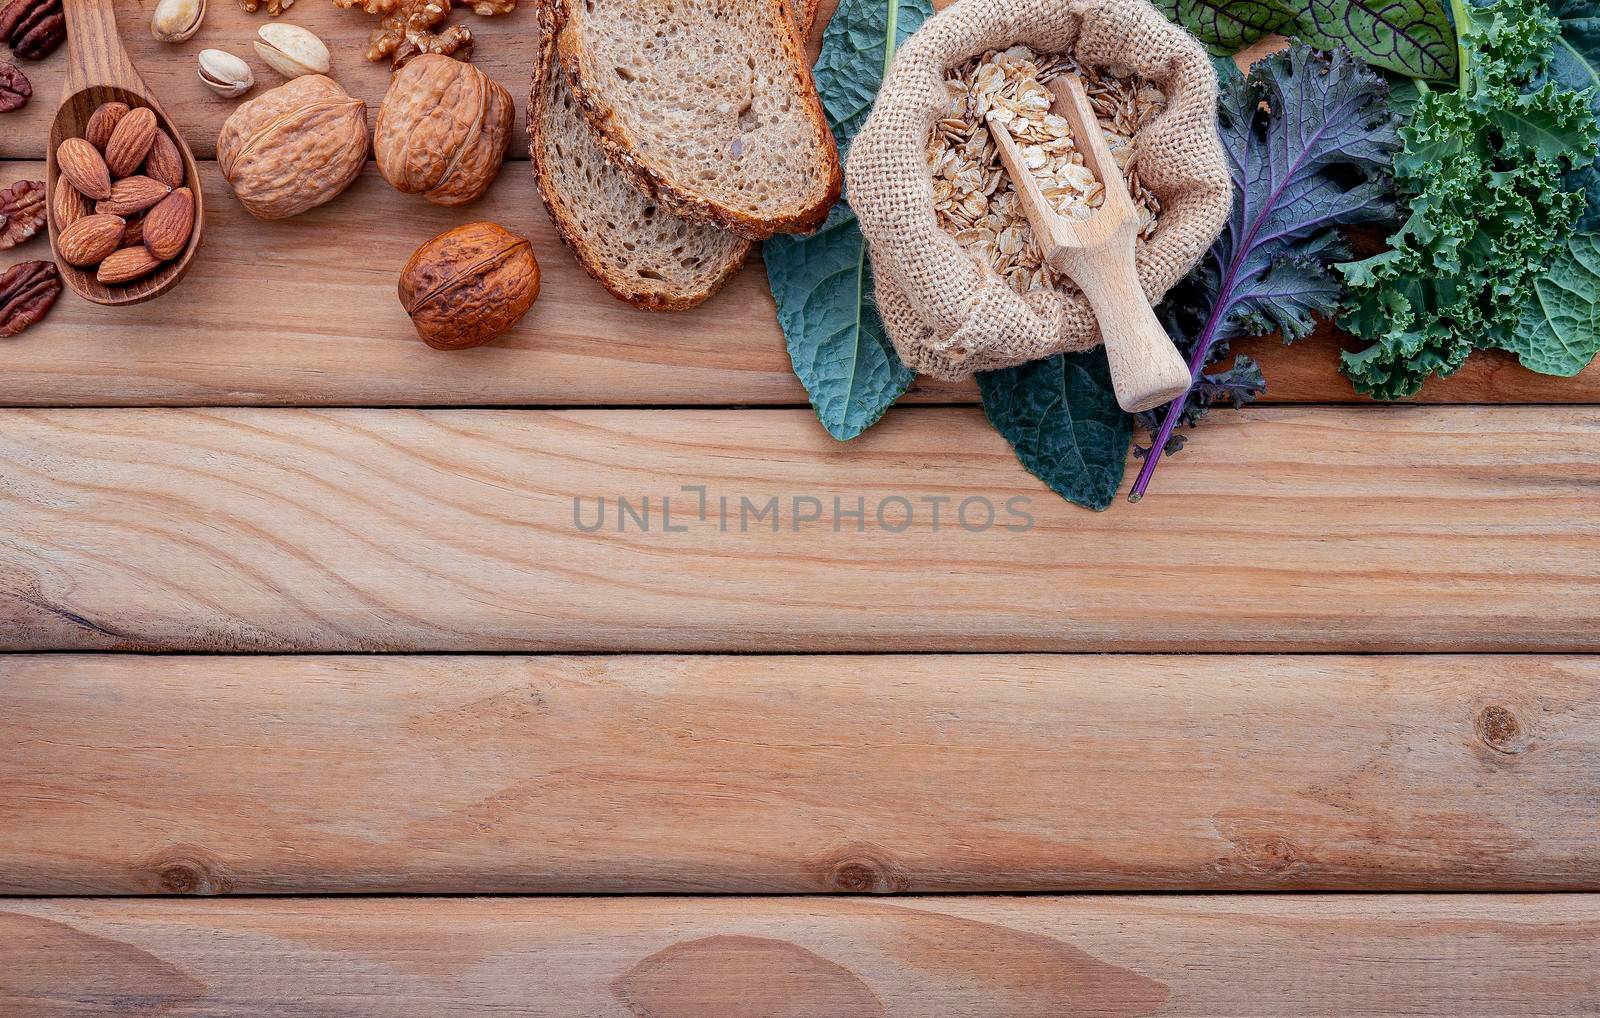 Ingredients for the healthy foods selection. The concept of healthy food set up on shabby wooden background. by kerdkanno